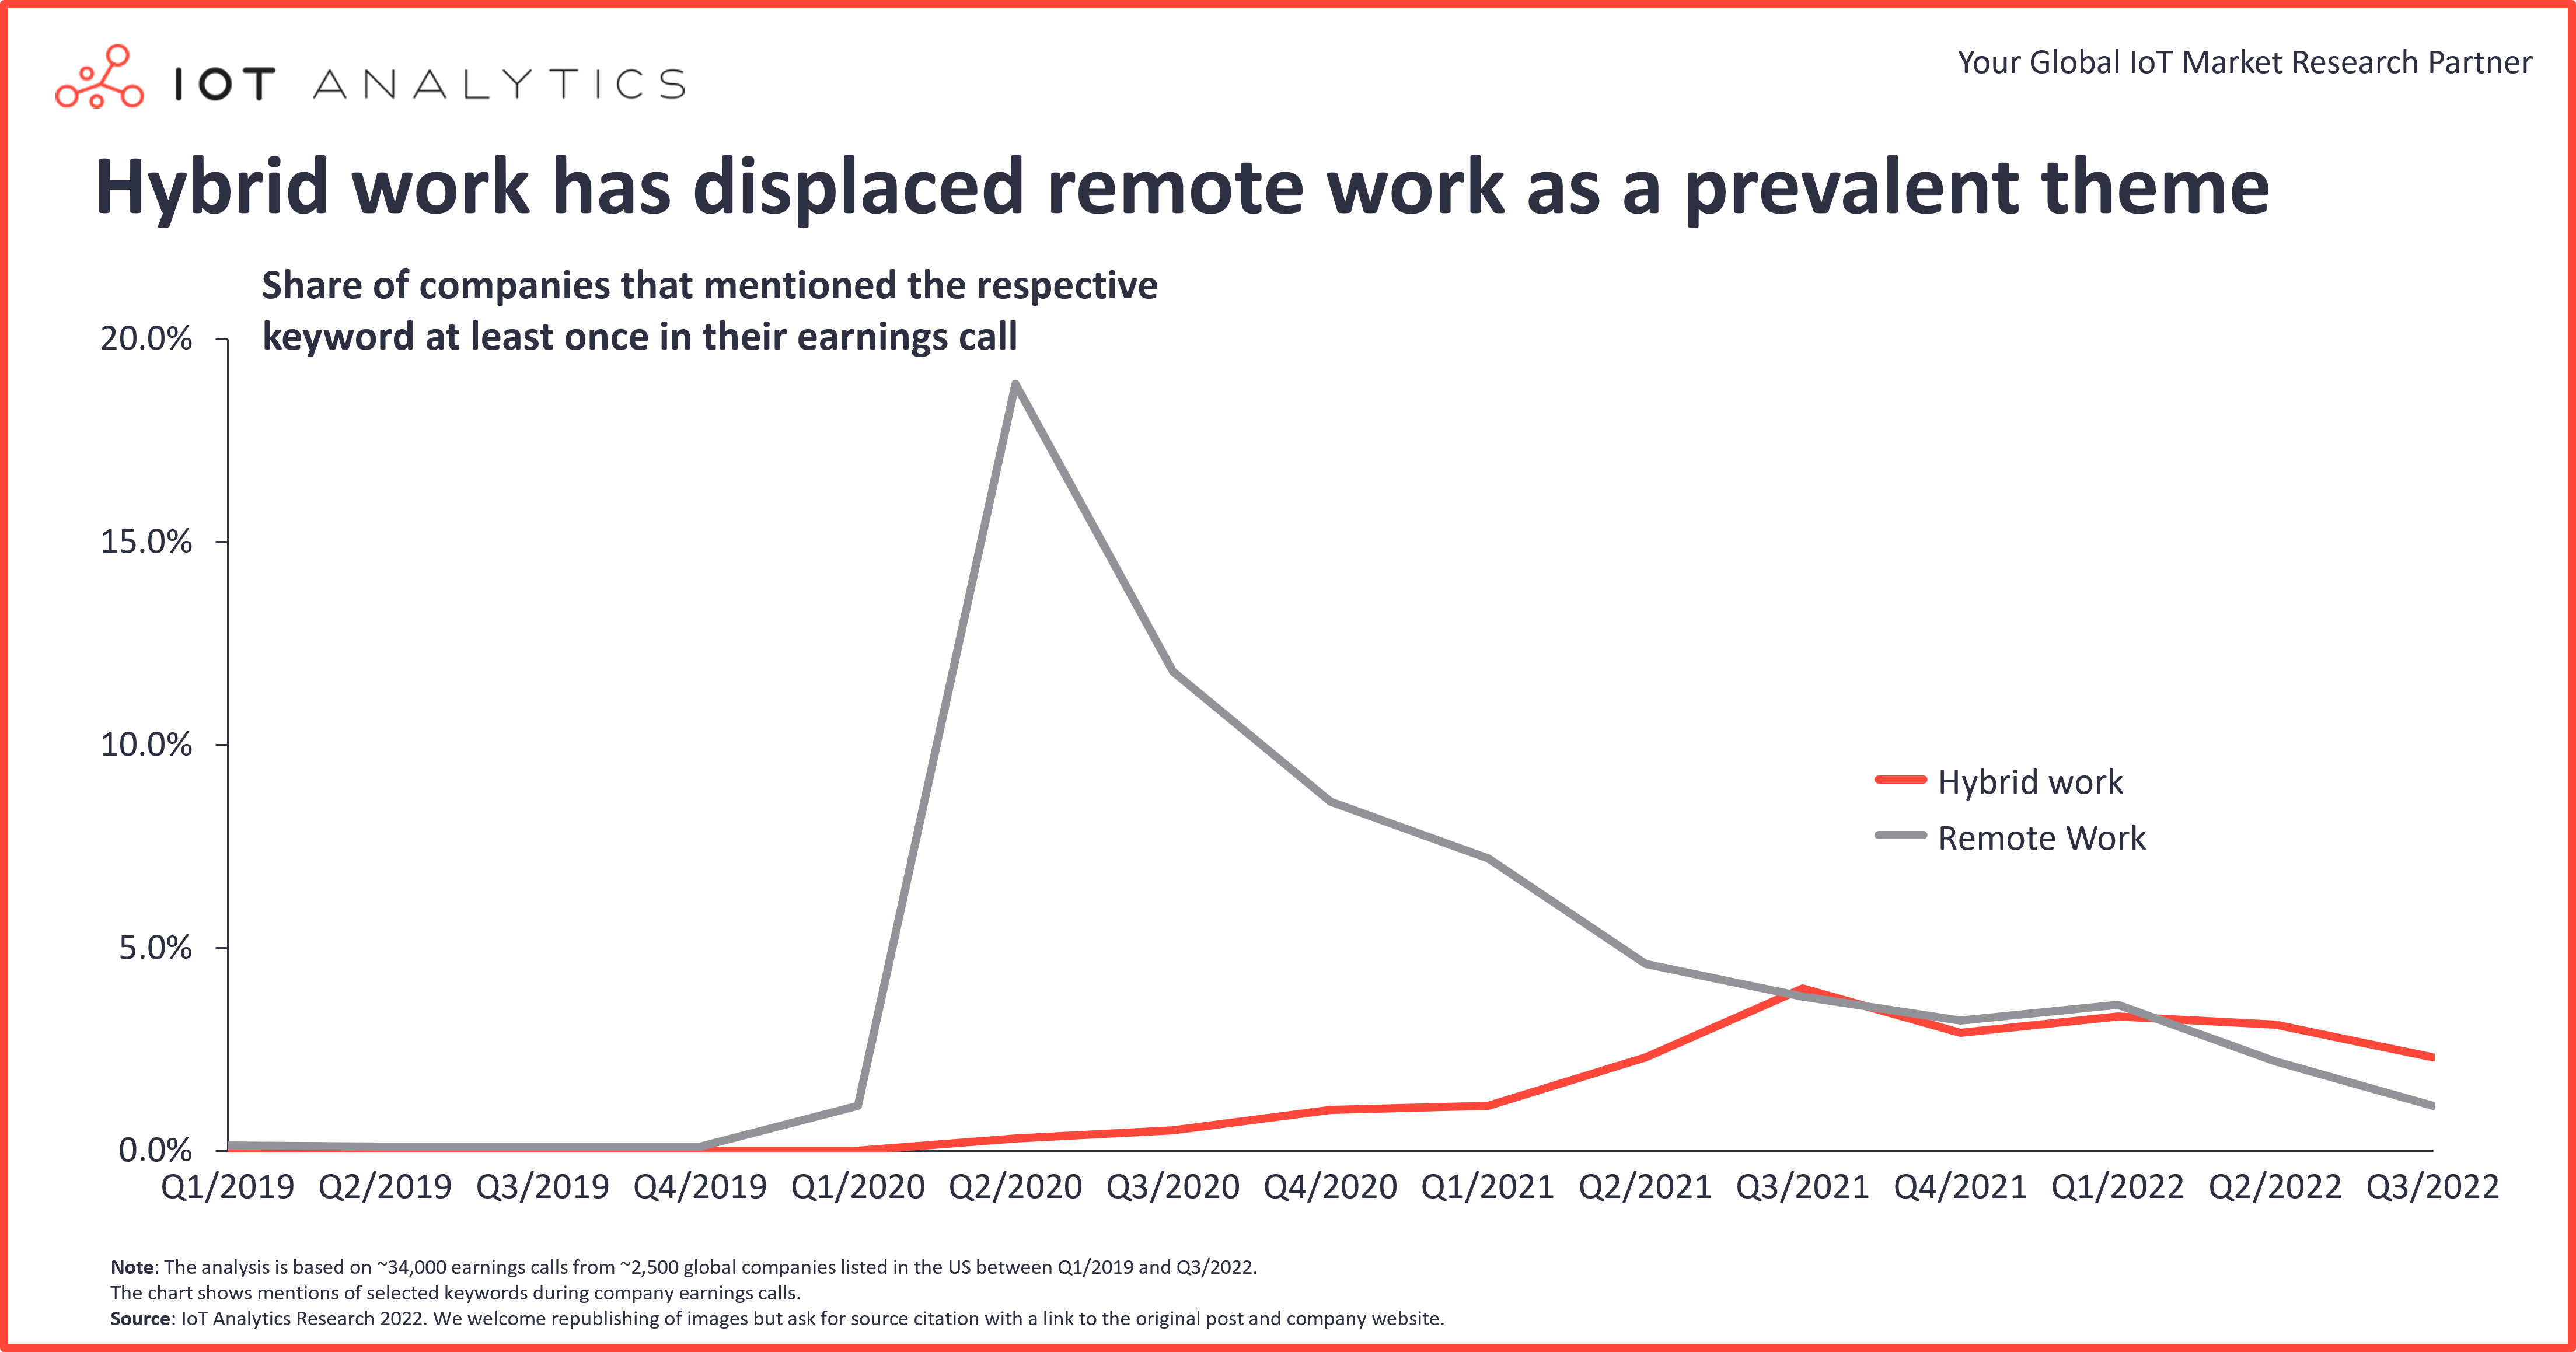 Hybrid work has displaced remote work as a prevalent theme